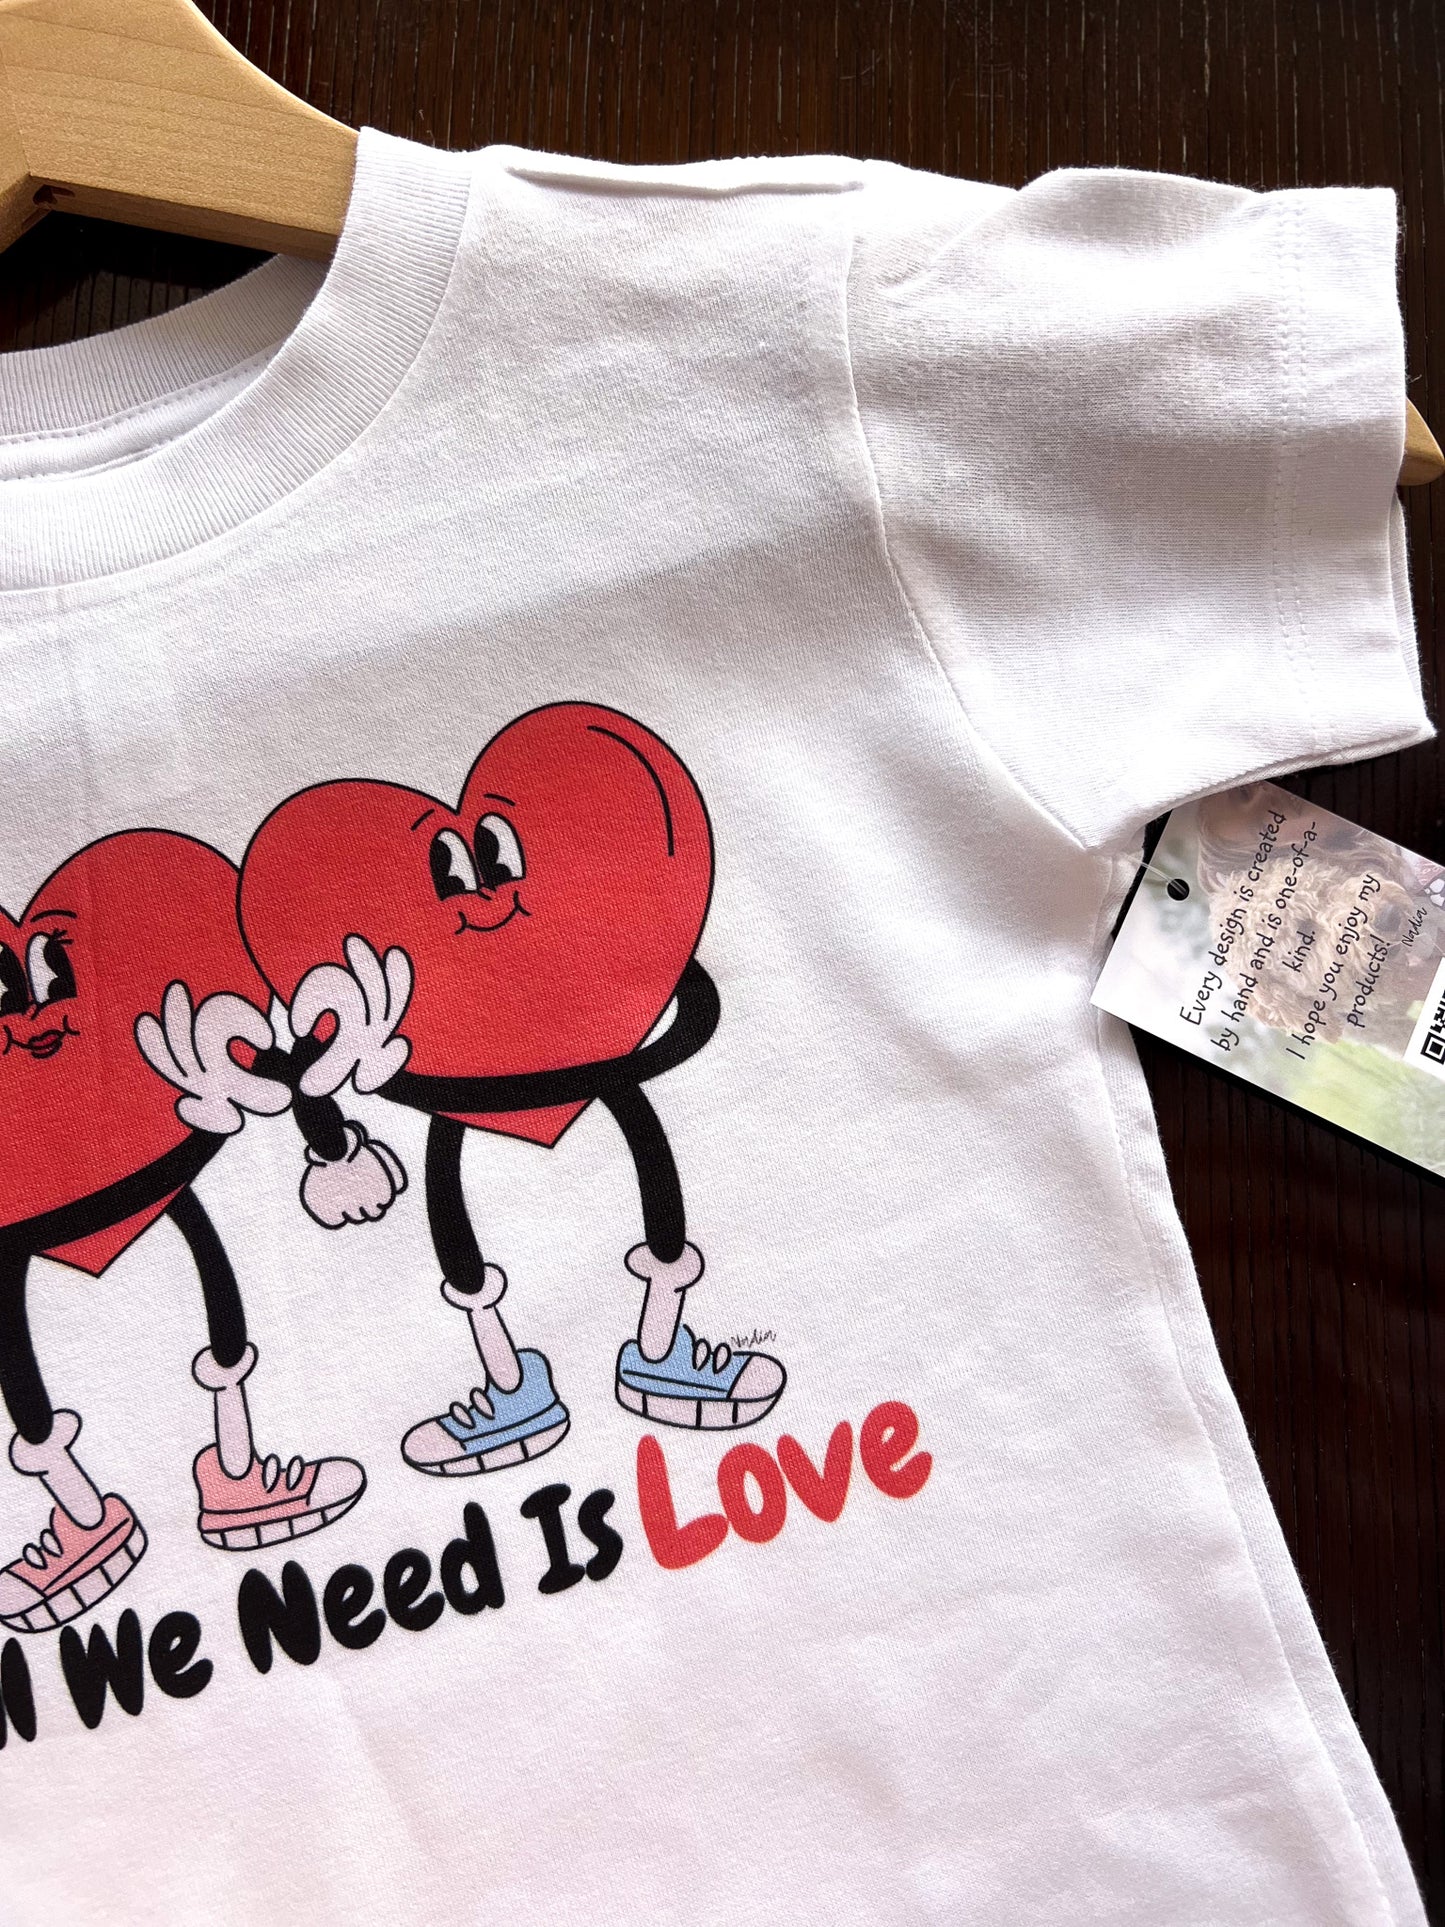 Love t-shirt for toddler by North Shore Kids